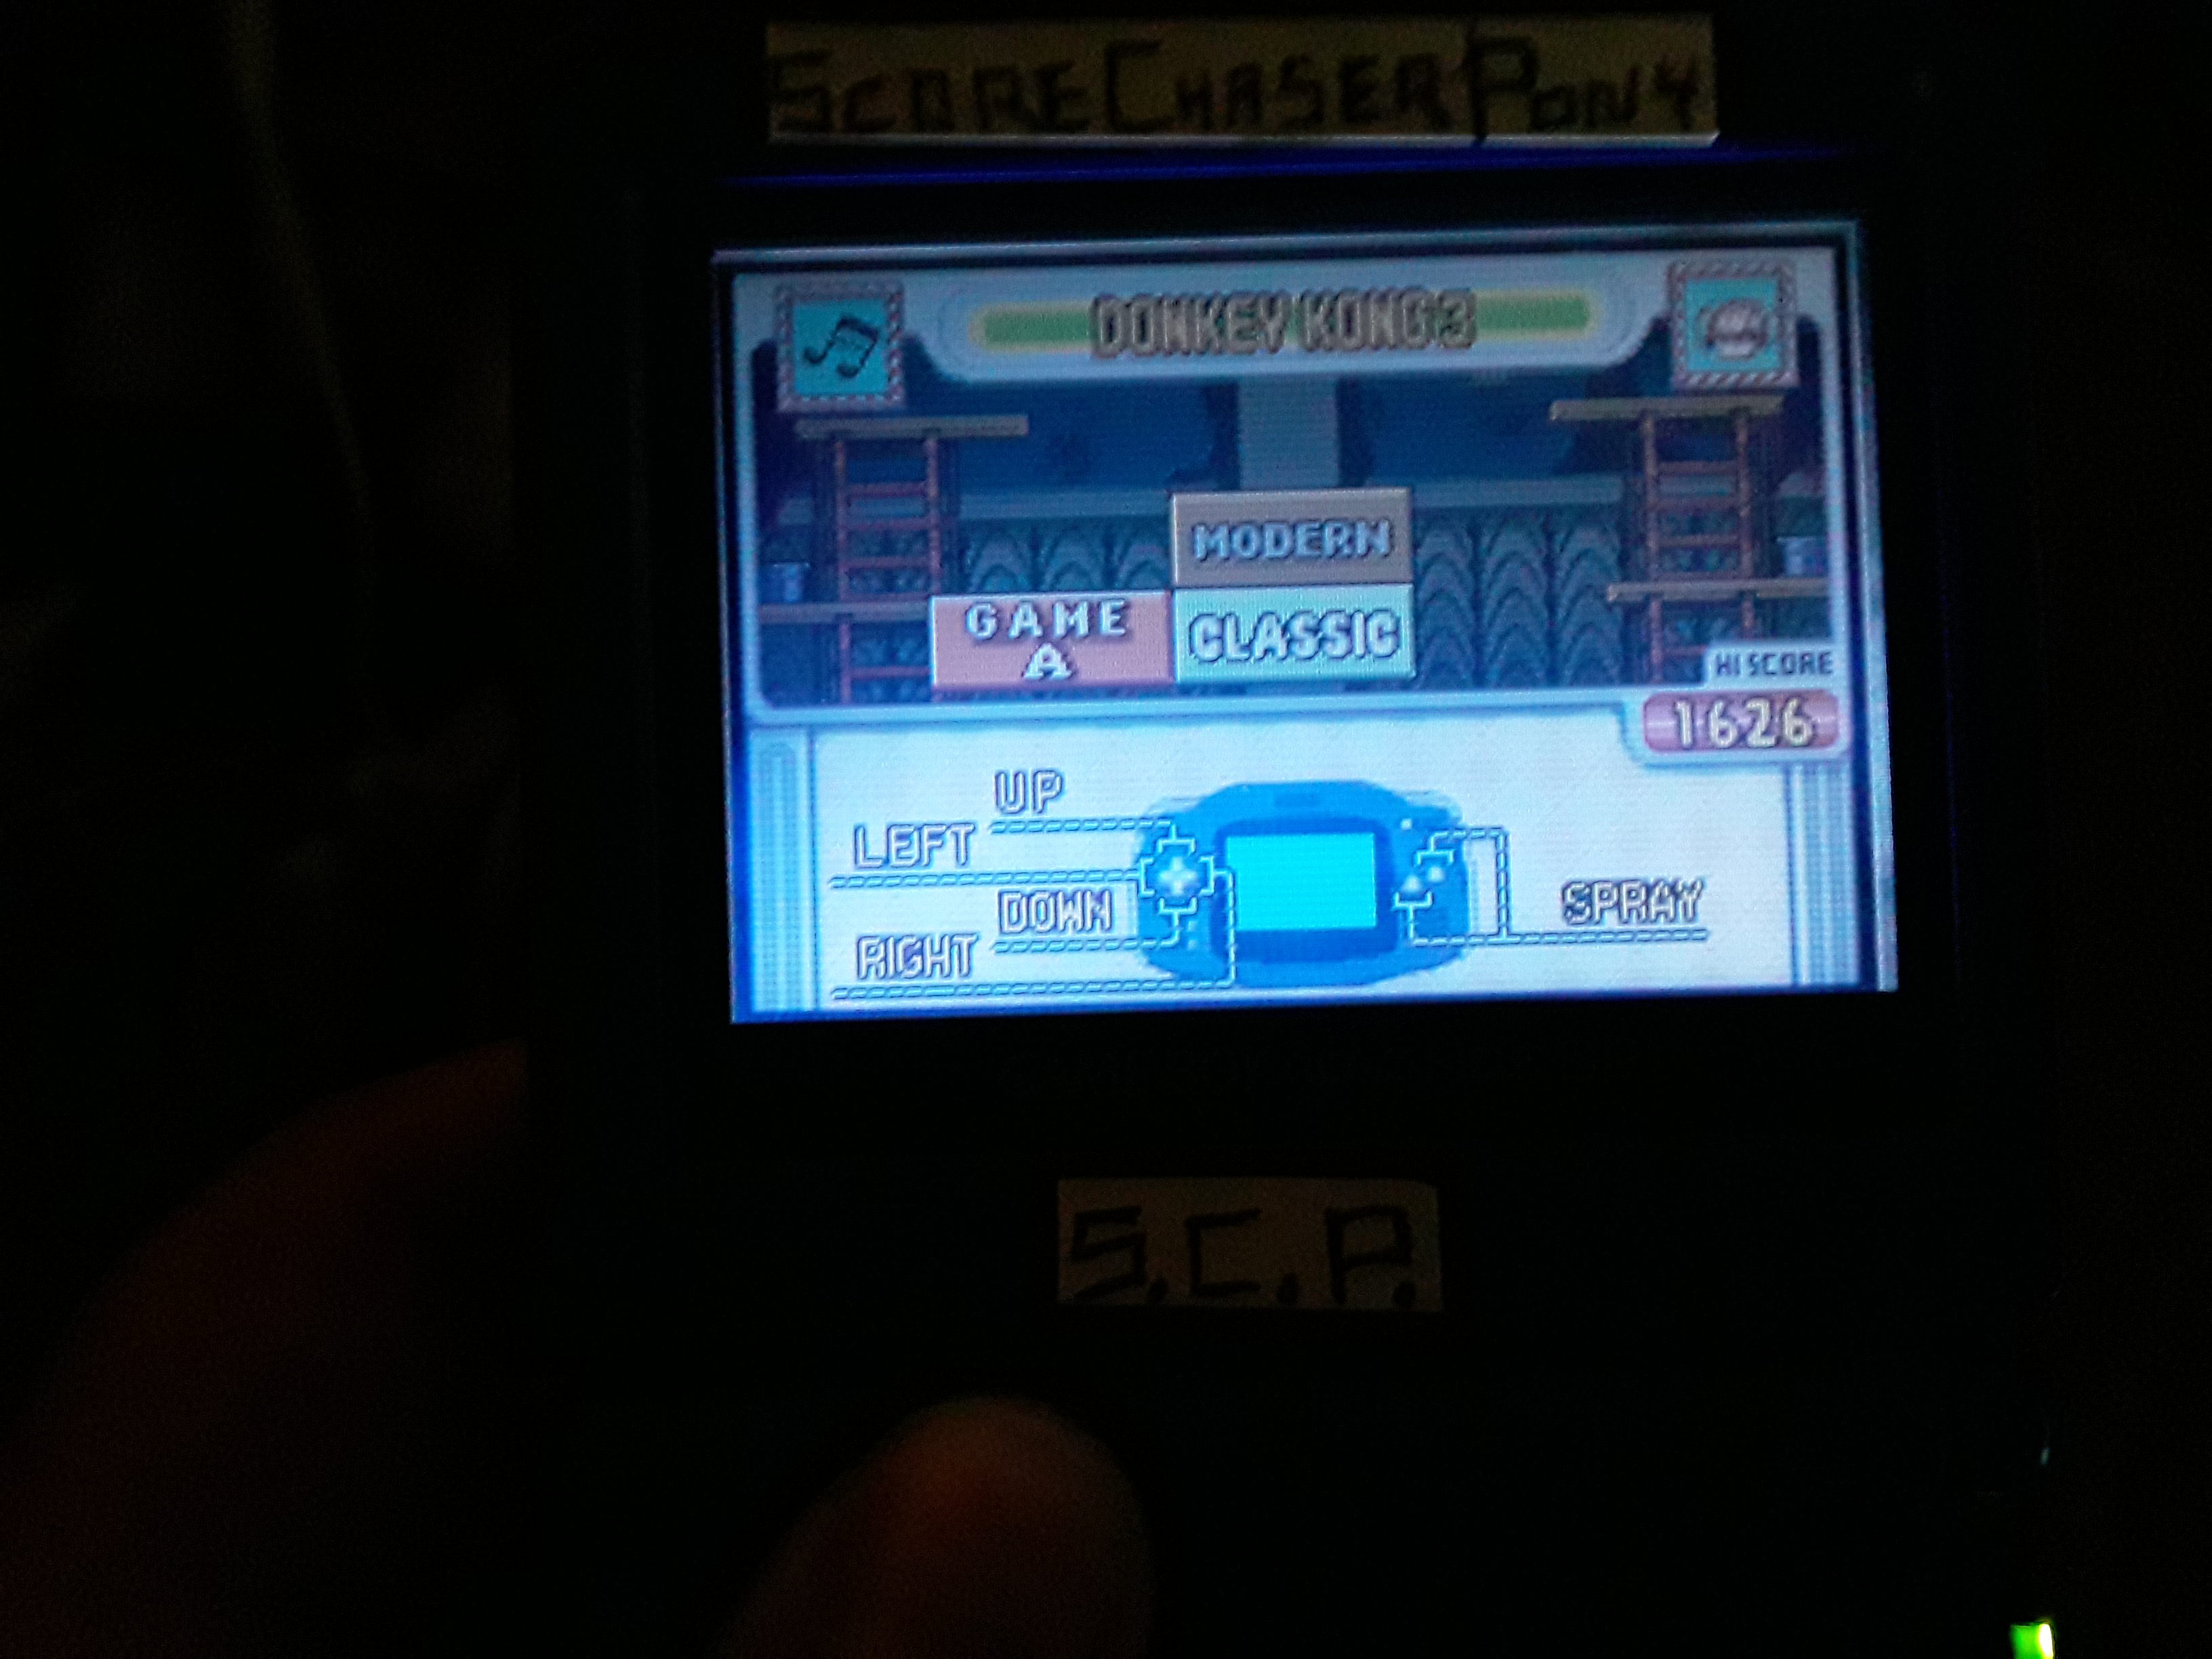 Scorechaserpony: Game & Watch Gallery 4: Donkey Kong 3 [Classic: Game A] (GBA) 1,626 points on 2019-07-31 15:32:00